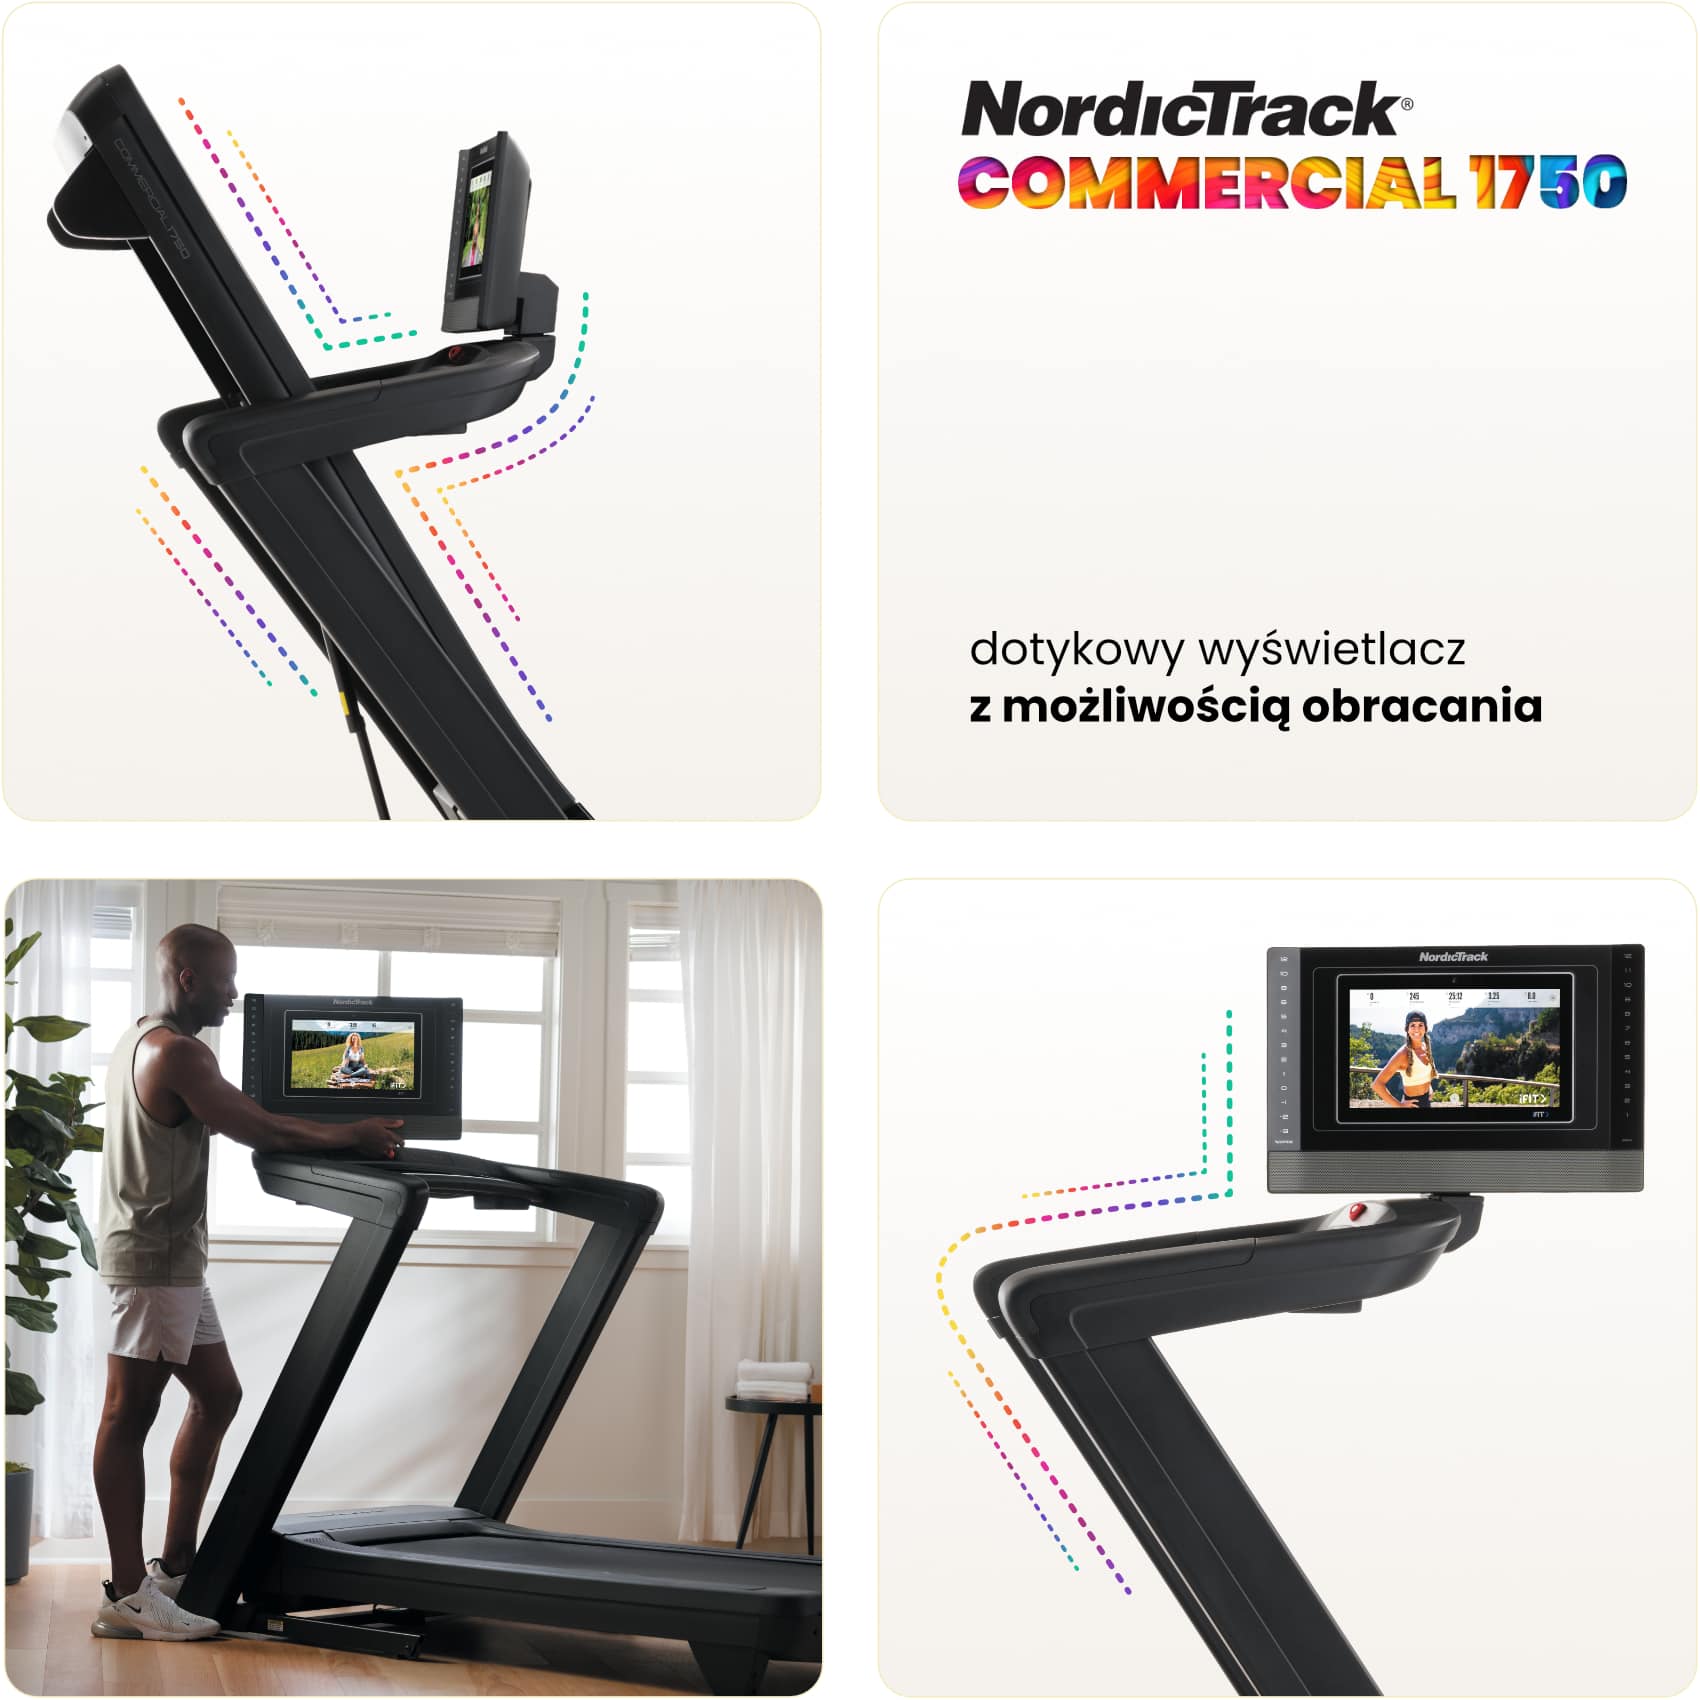 NordicTrack commercial 1750